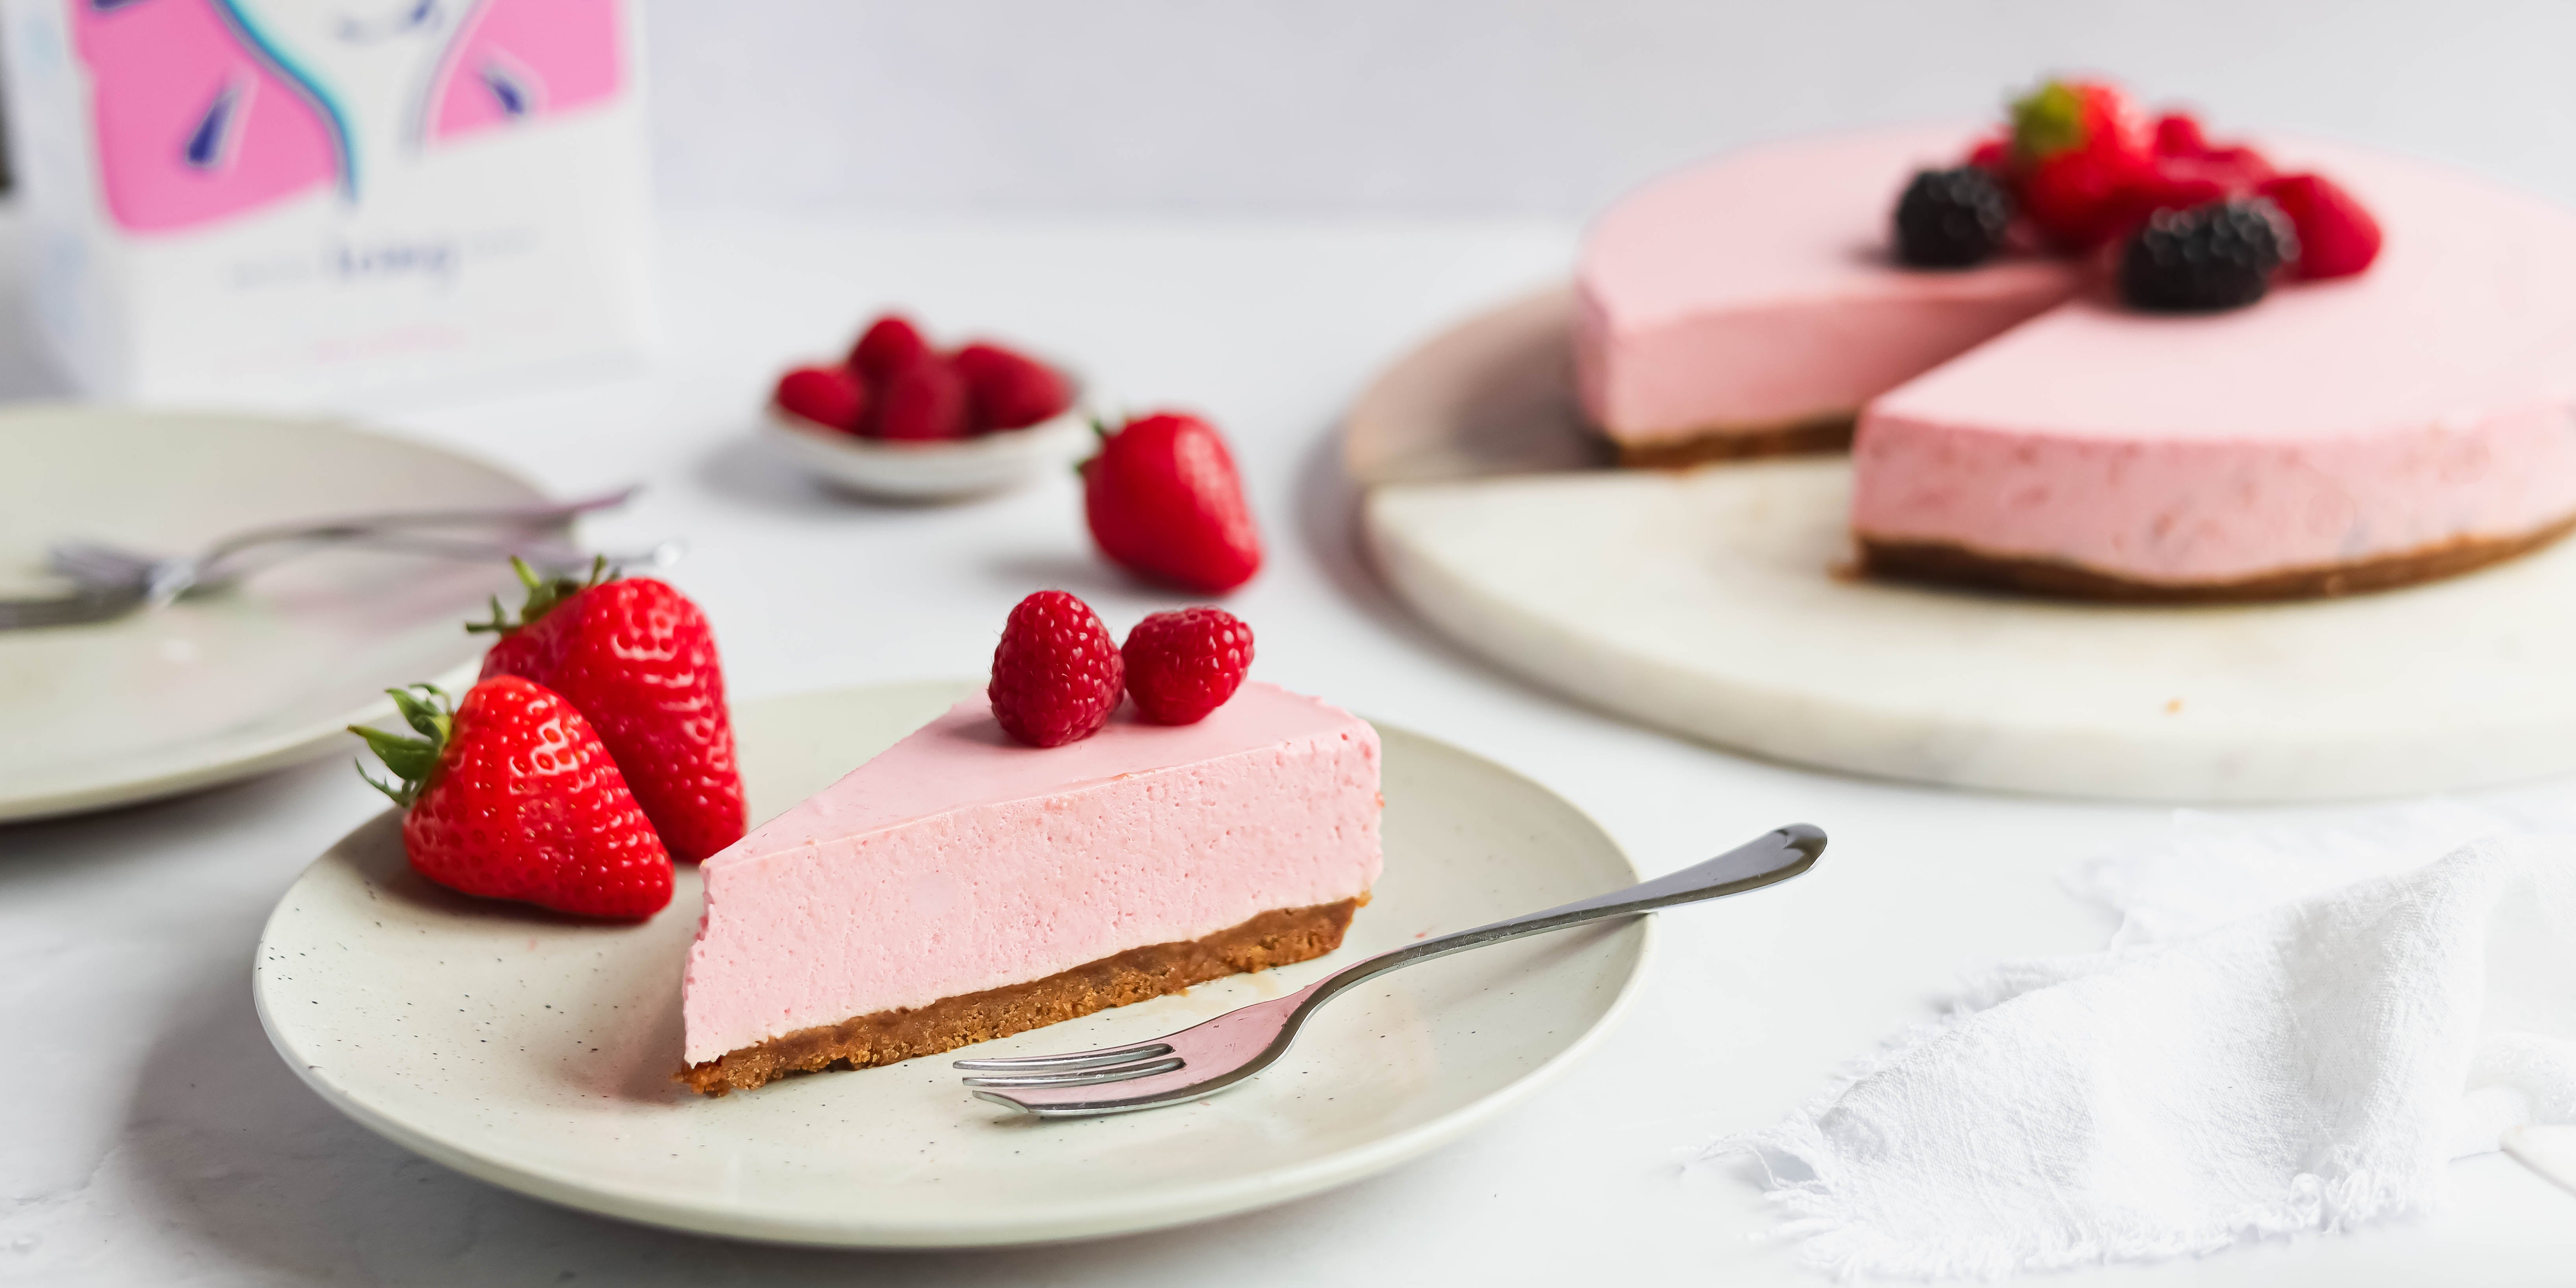 Strawberry Mousse Cake with Gluten Free Chocolate Genoise Sponge